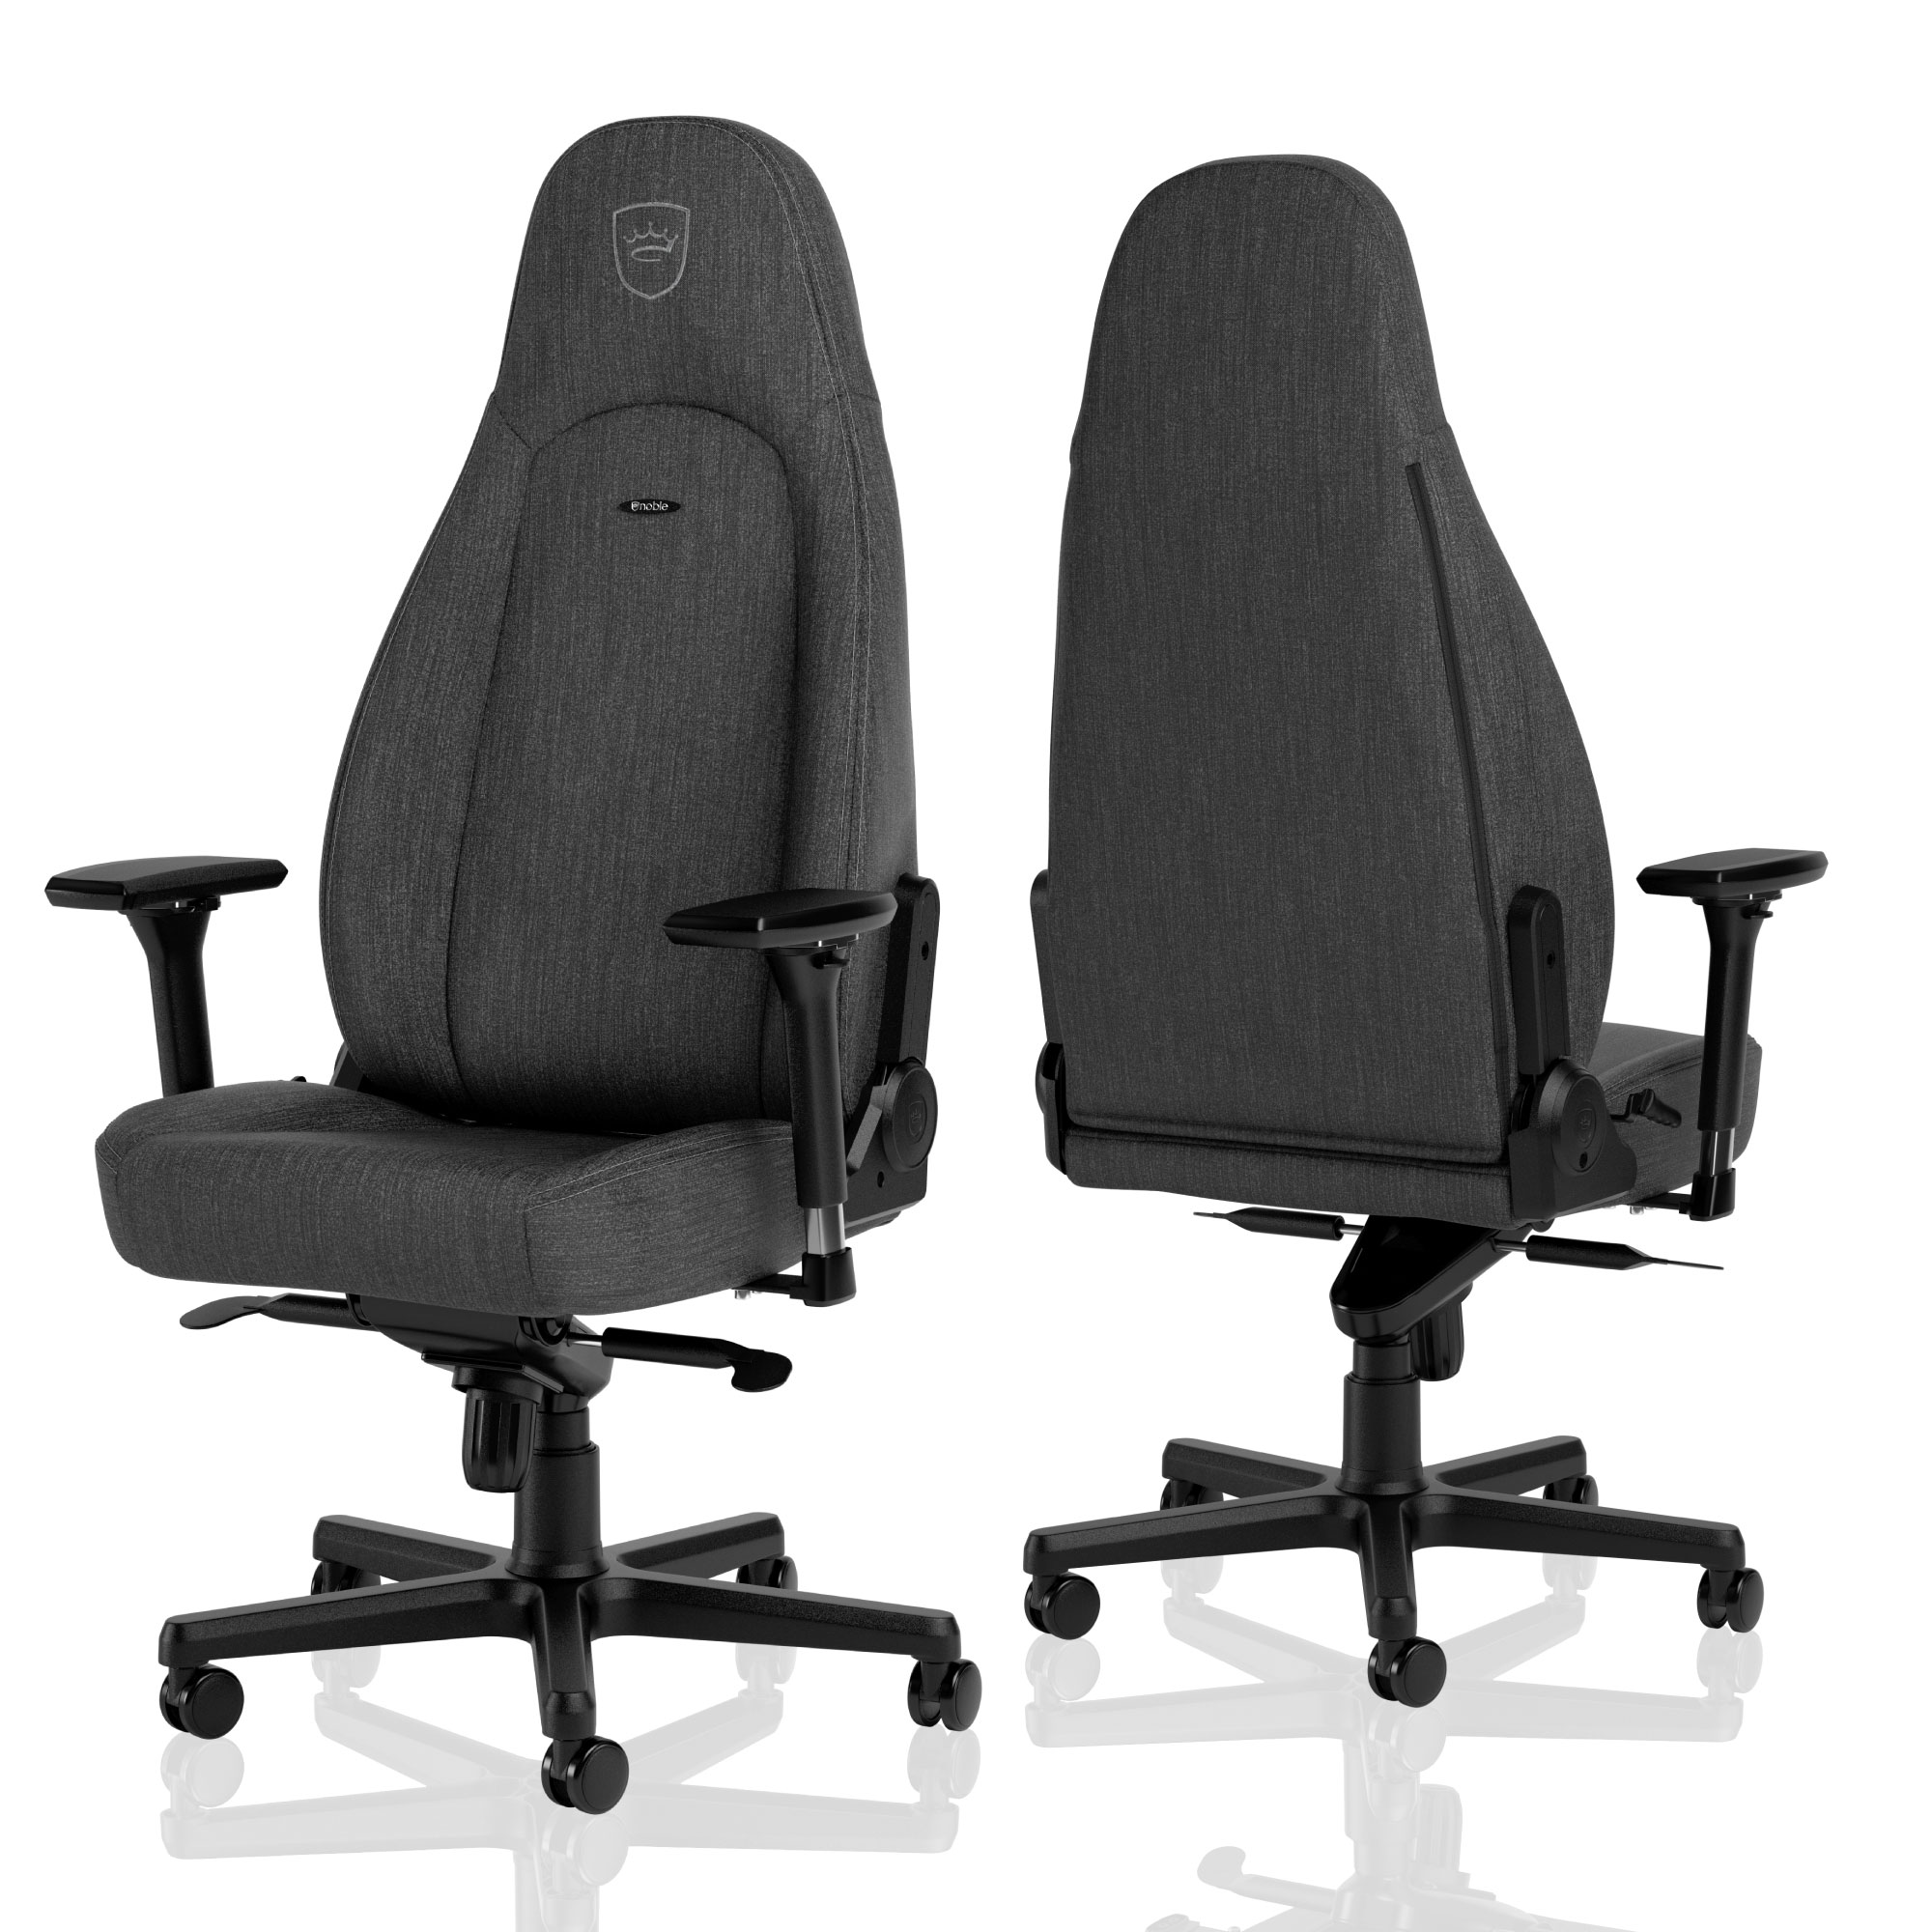 noblechairs ICON - TX - ゲーミングチェア - 株式会社アーキサイト